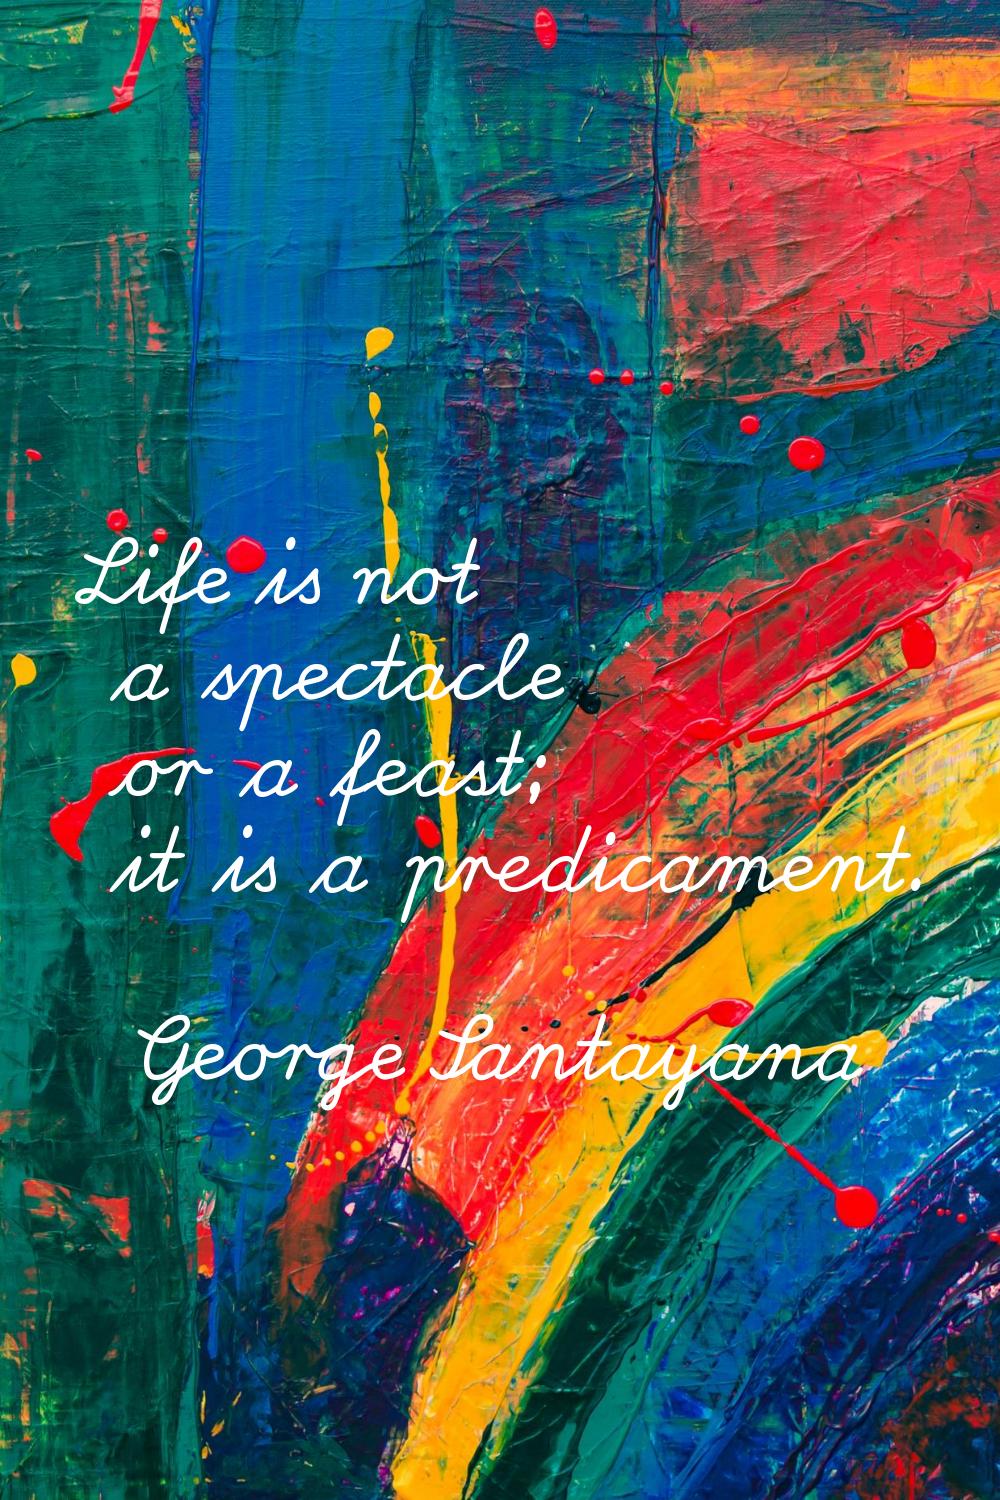 Life is not a spectacle or a feast; it is a predicament.